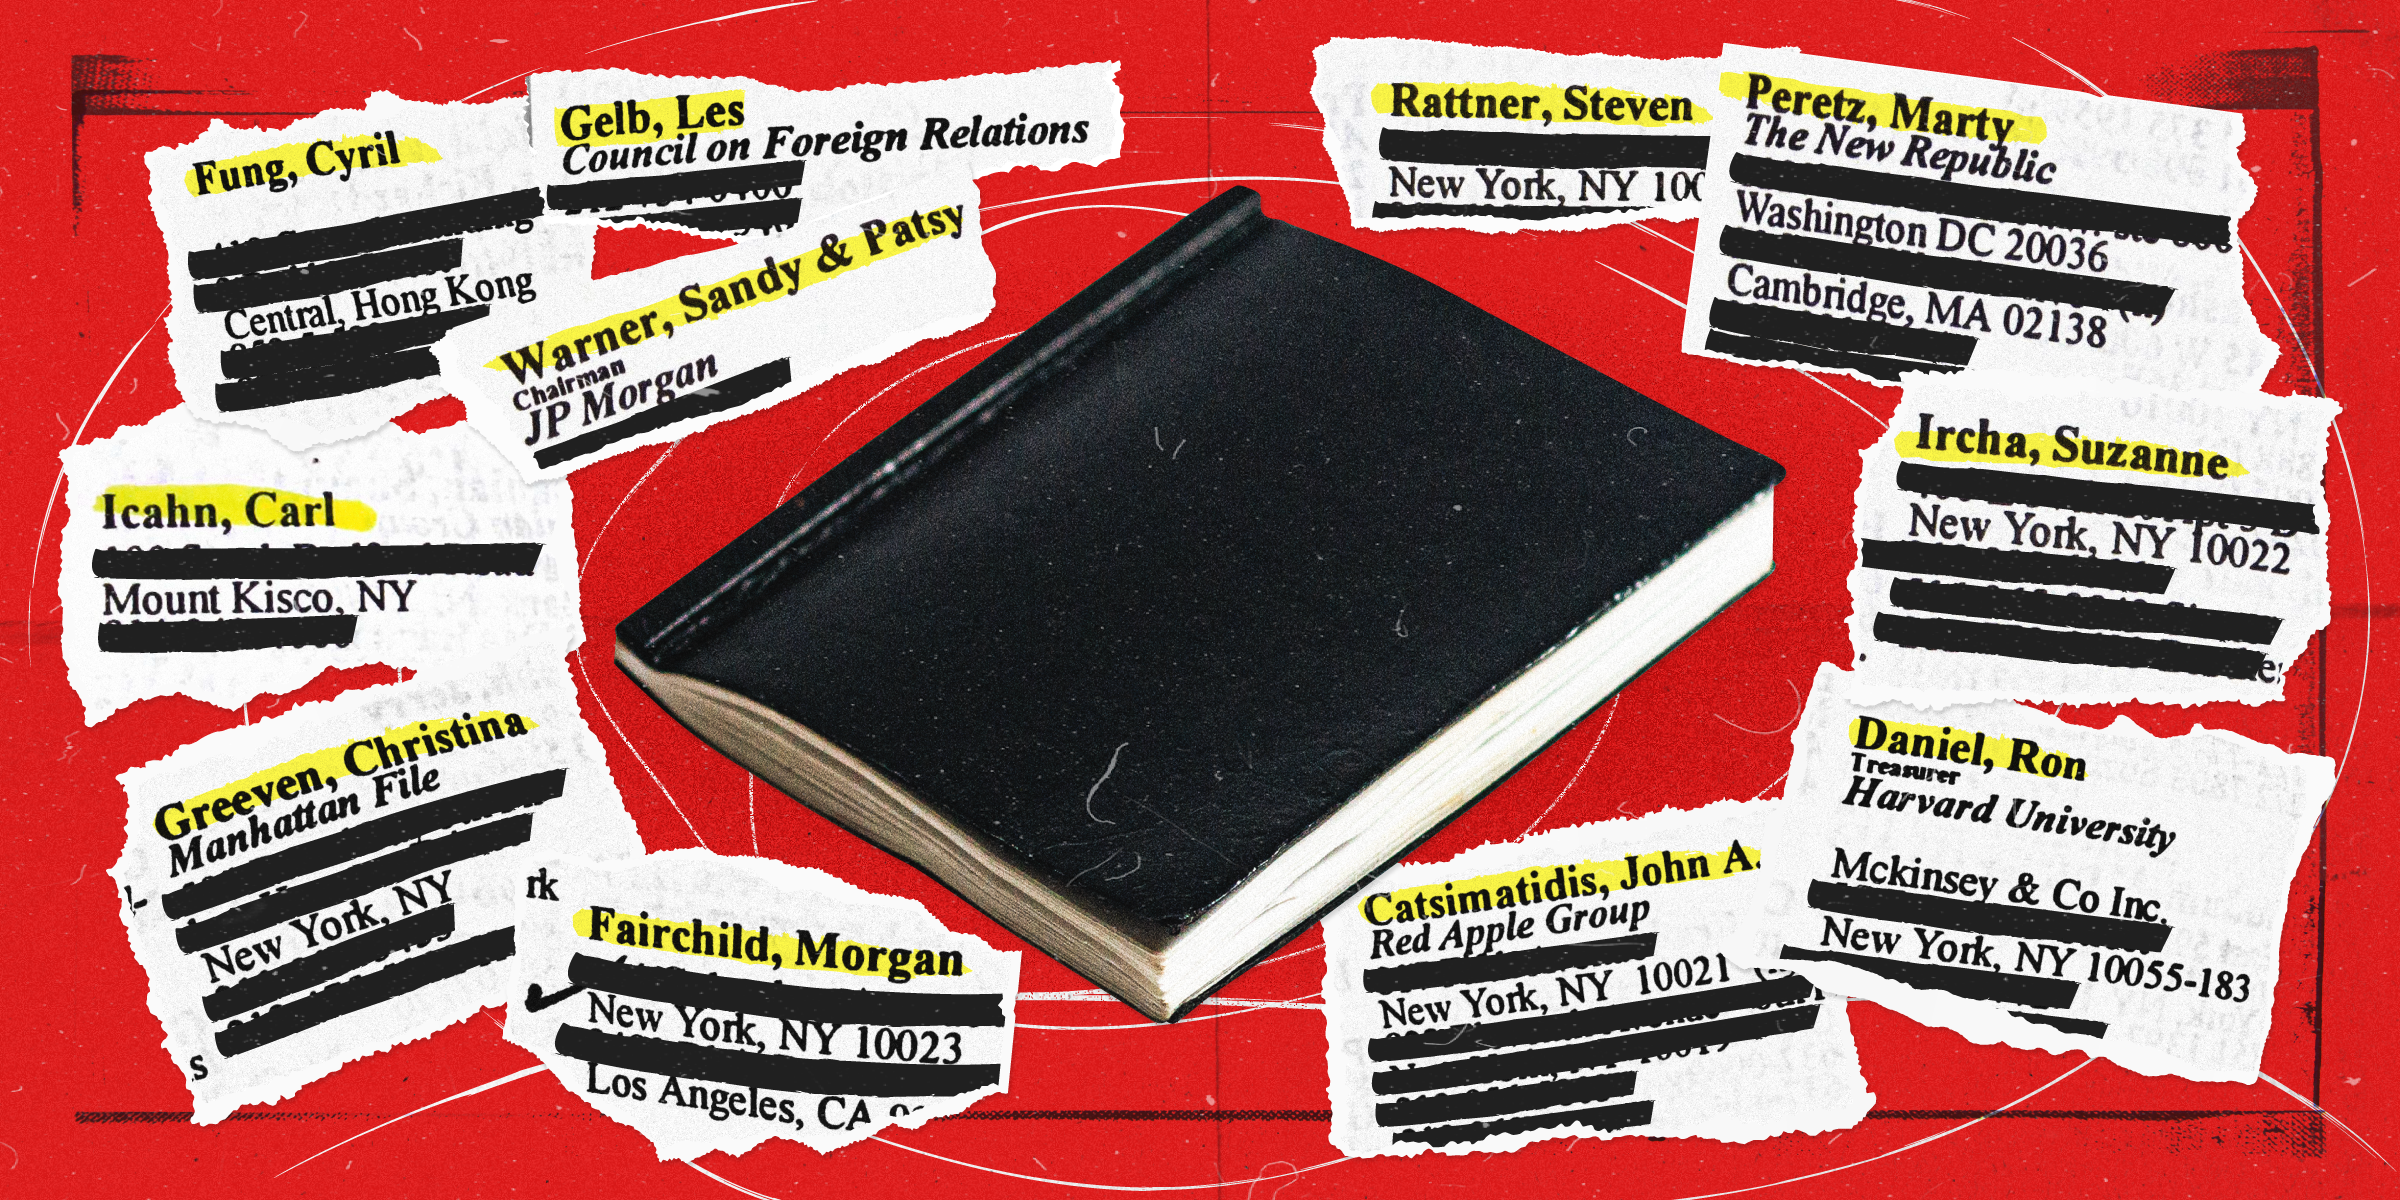 Jeffrey Epstein's address book surrounded by ripped pieces of paper with select names from the book on a red background